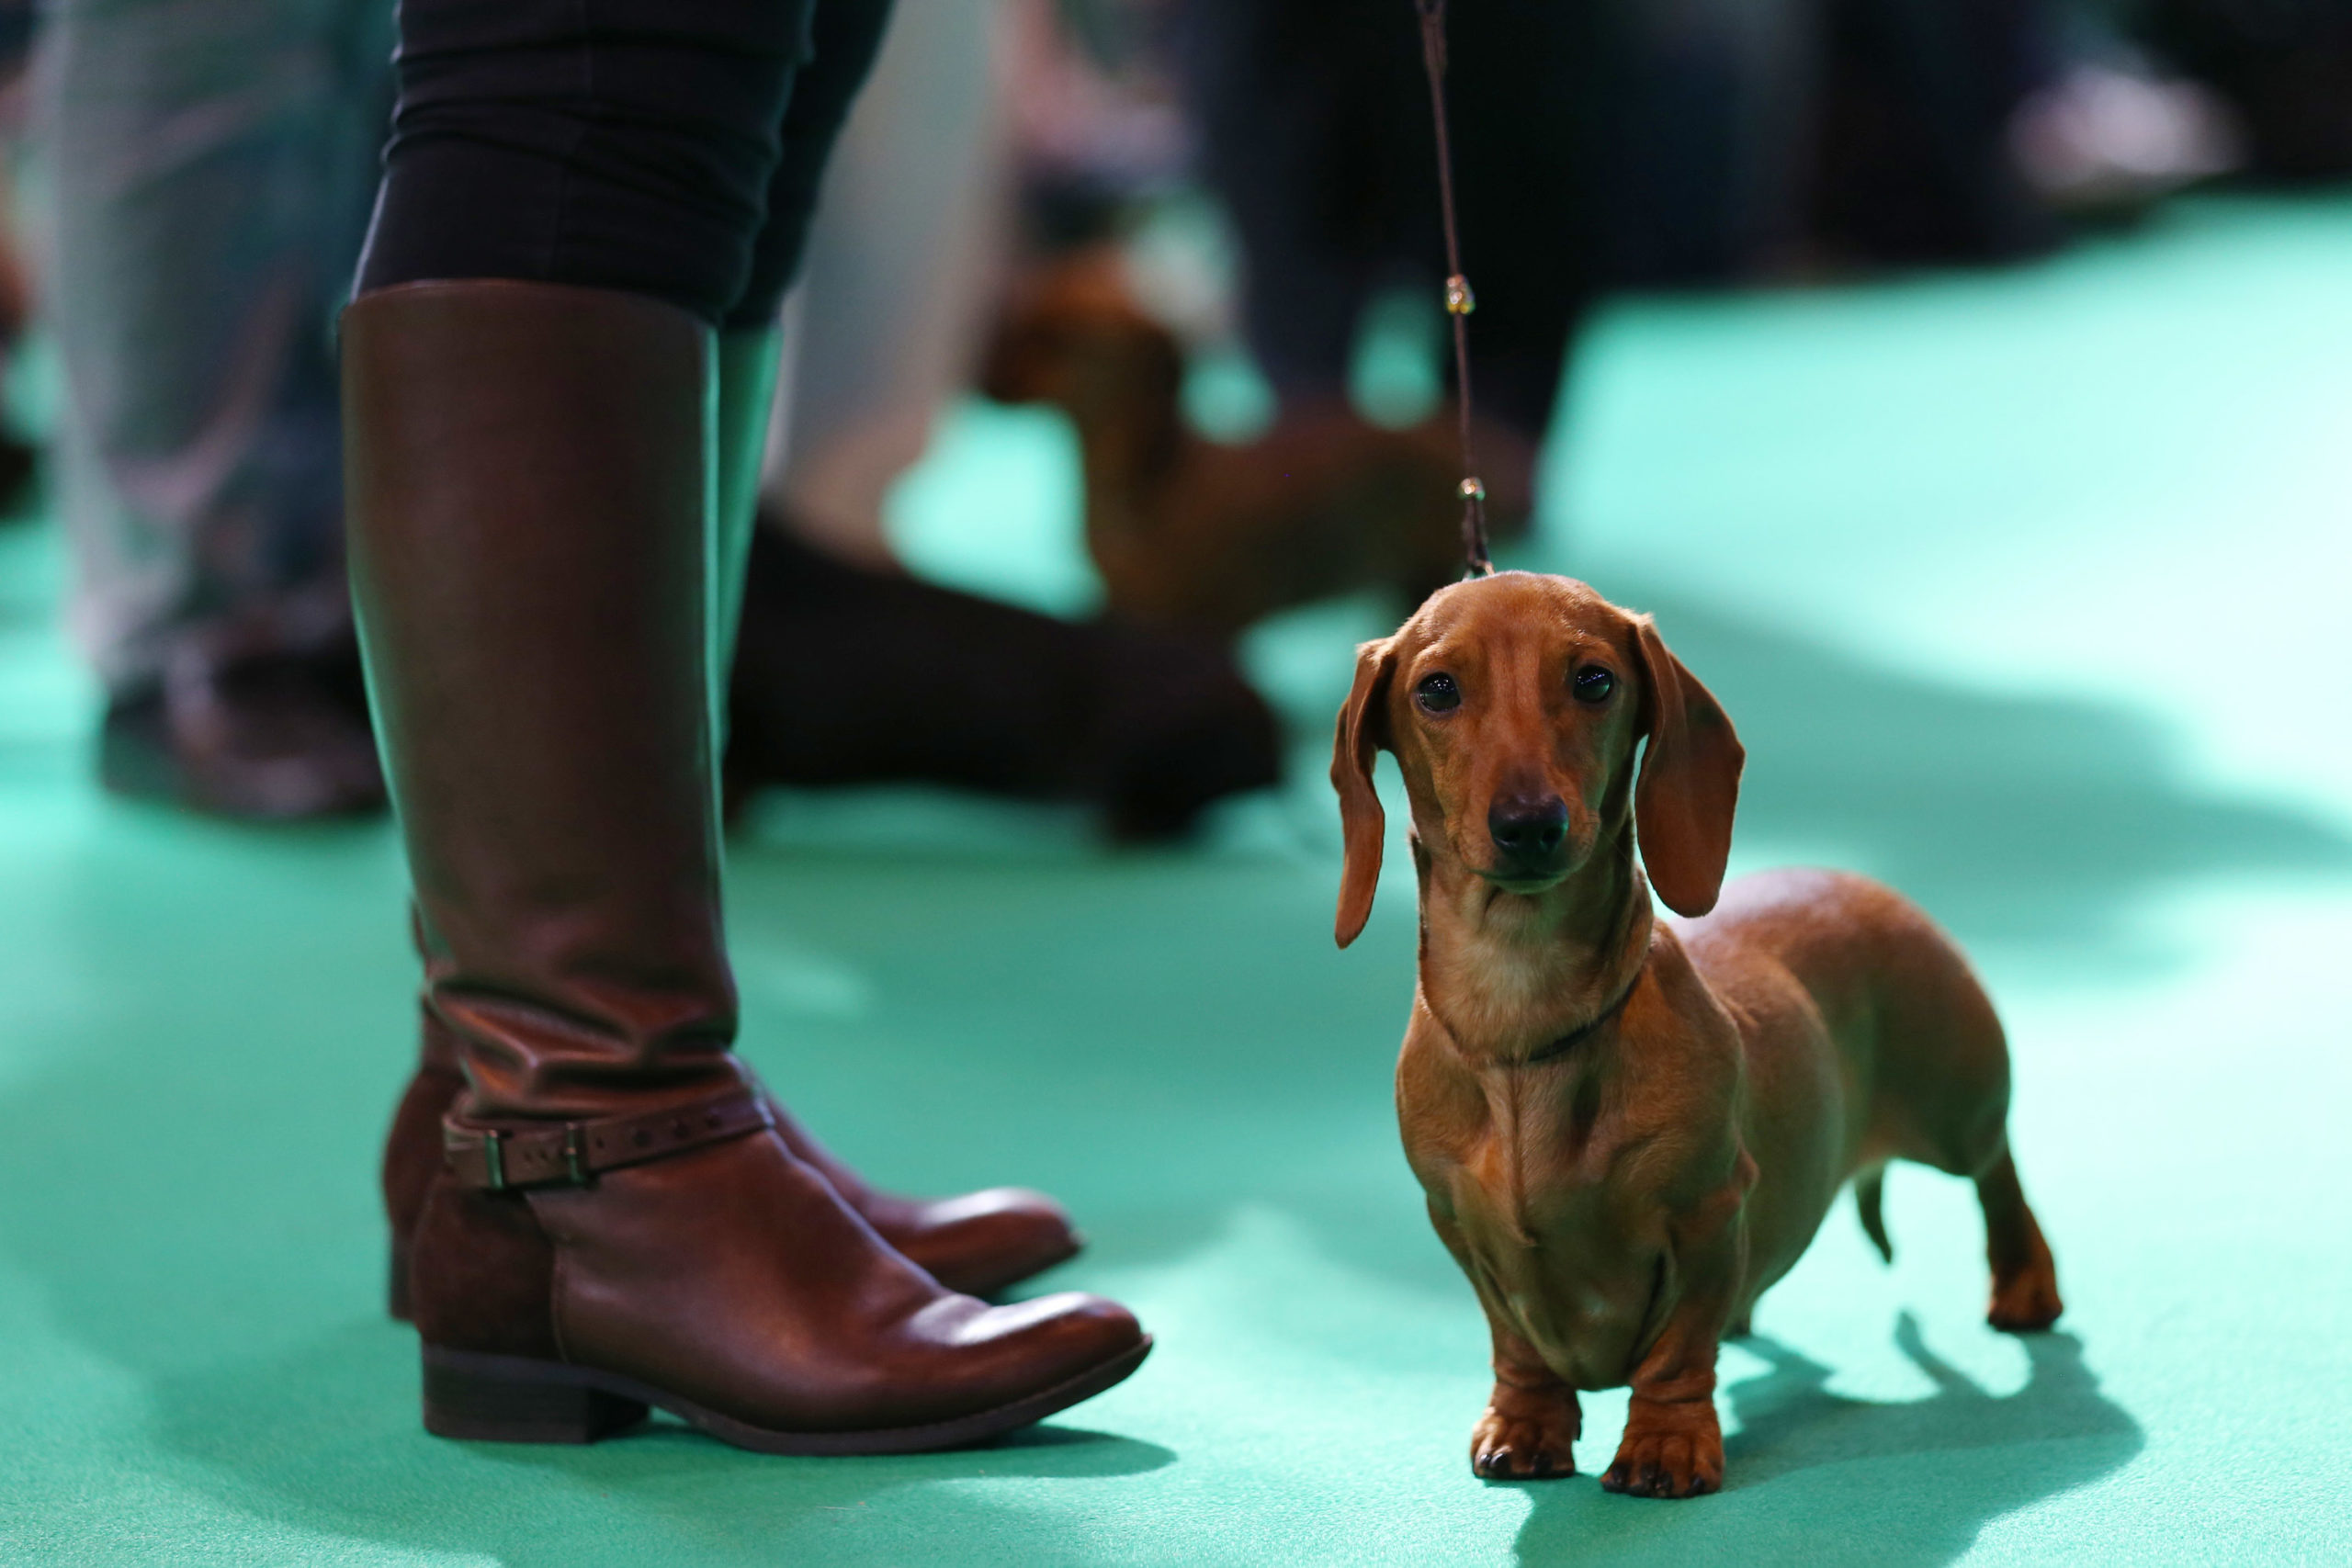 BIRMINGHAM, ENGLAND - MARCH 07: Dachshund hounds are judged in a show ring on the second day of the Crufts dog show at the NEC on March 7, 2014 in Birmingham, England. Said to be the largest show of its kind in the world, the annual four-day event, features thousands of dogs, with competitors travelling from countries across the globe to take part. Crufts, which was first held in 1891 and sees thousands of dogs vie for the coveted title of 'Best in Show'. (Photo by Matt Cardy/Getty Images)